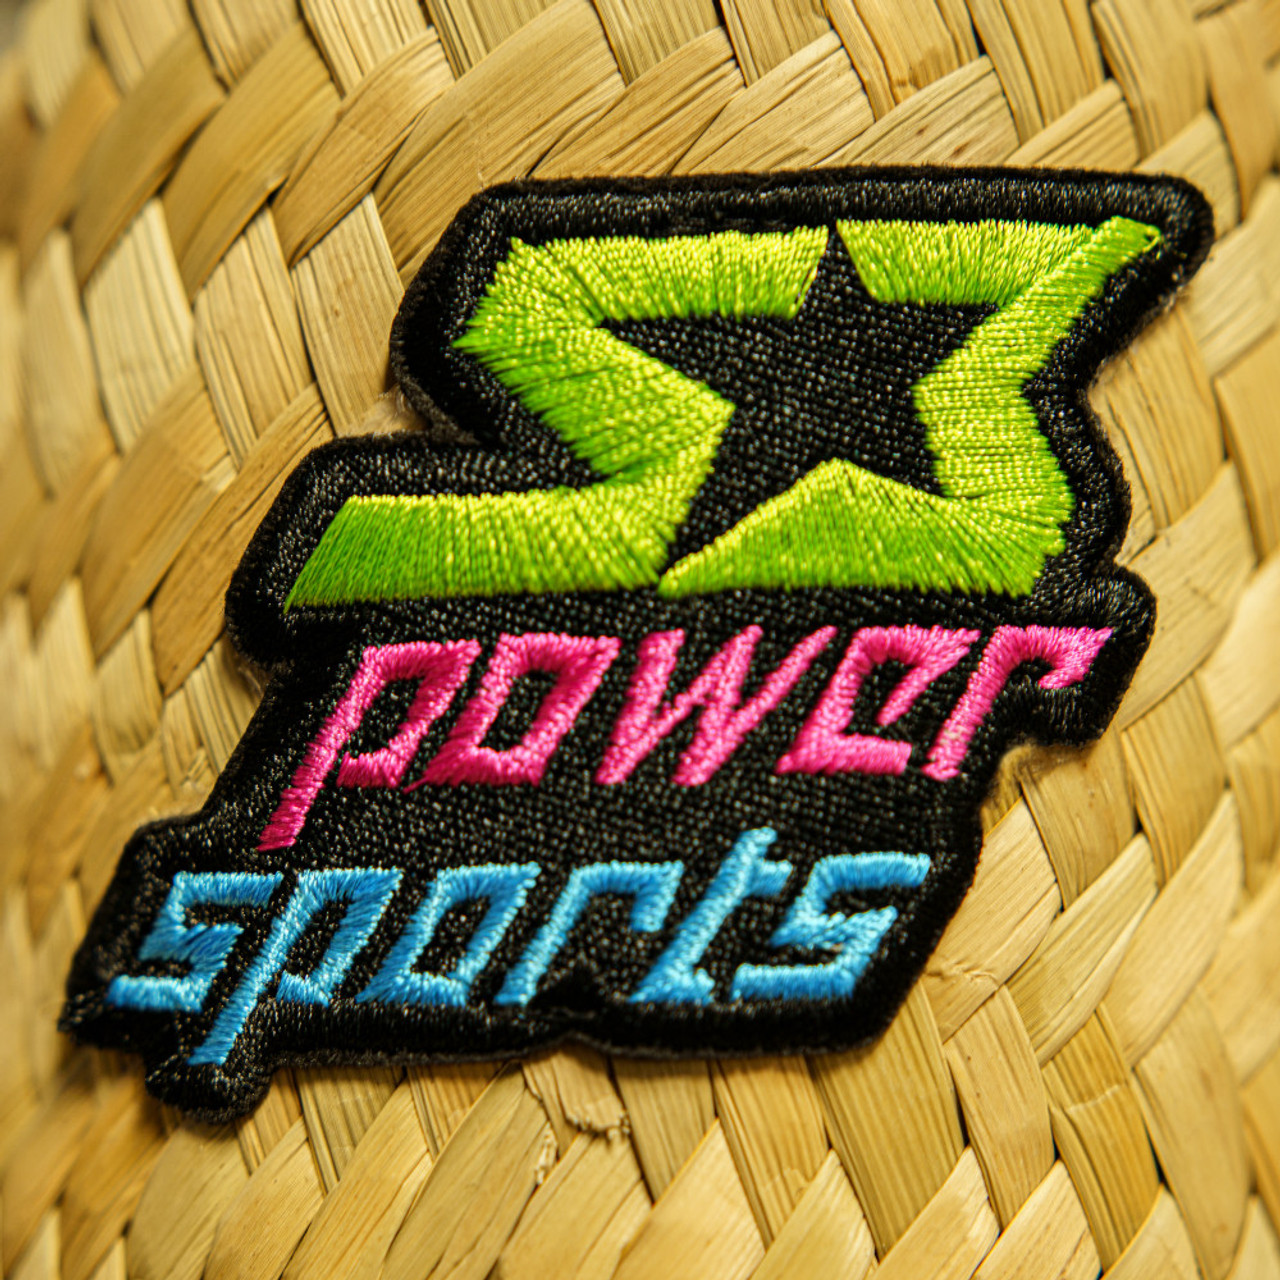 S3 Power Sports "Watch or Be Watched" Straw Hat